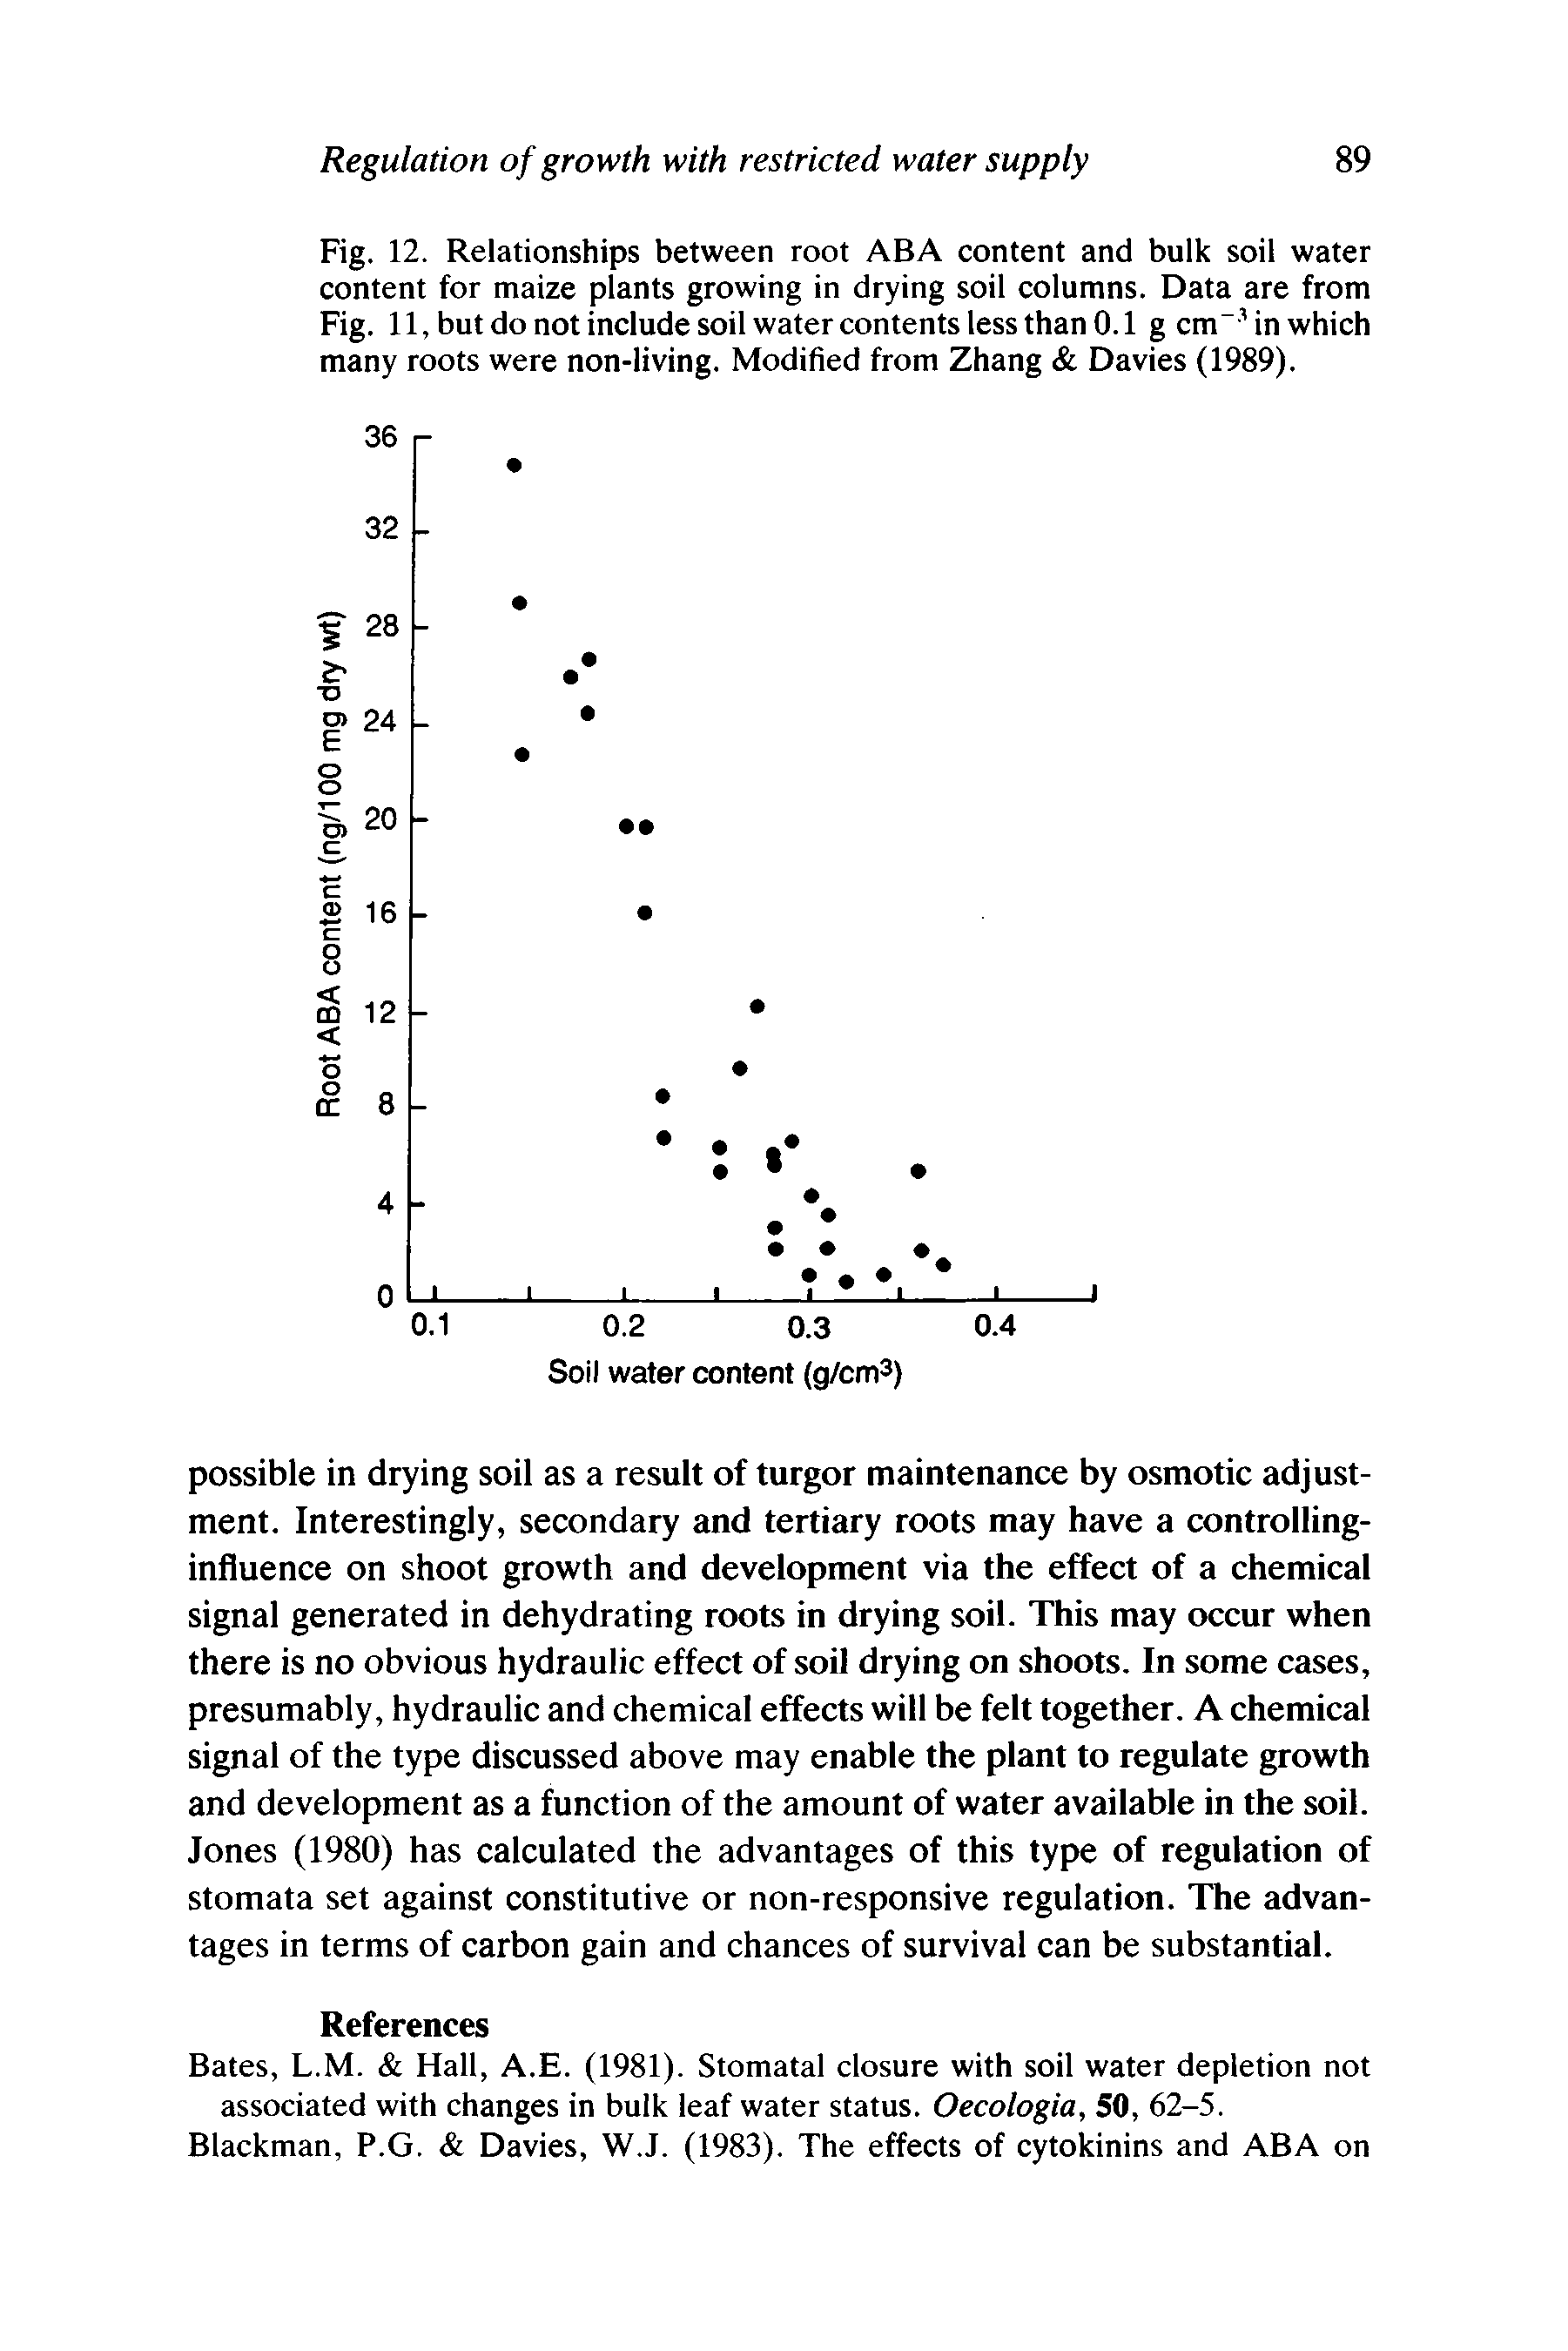 Fig. 12. Relationships between root ABA content and bulk soil water content for maize plants growing in drying soil columns. Data are from Fig. 11, but do not include soil water contents less than 0.1 g cm in which many roots were non-living. Modified from Zhang Davies (1989).